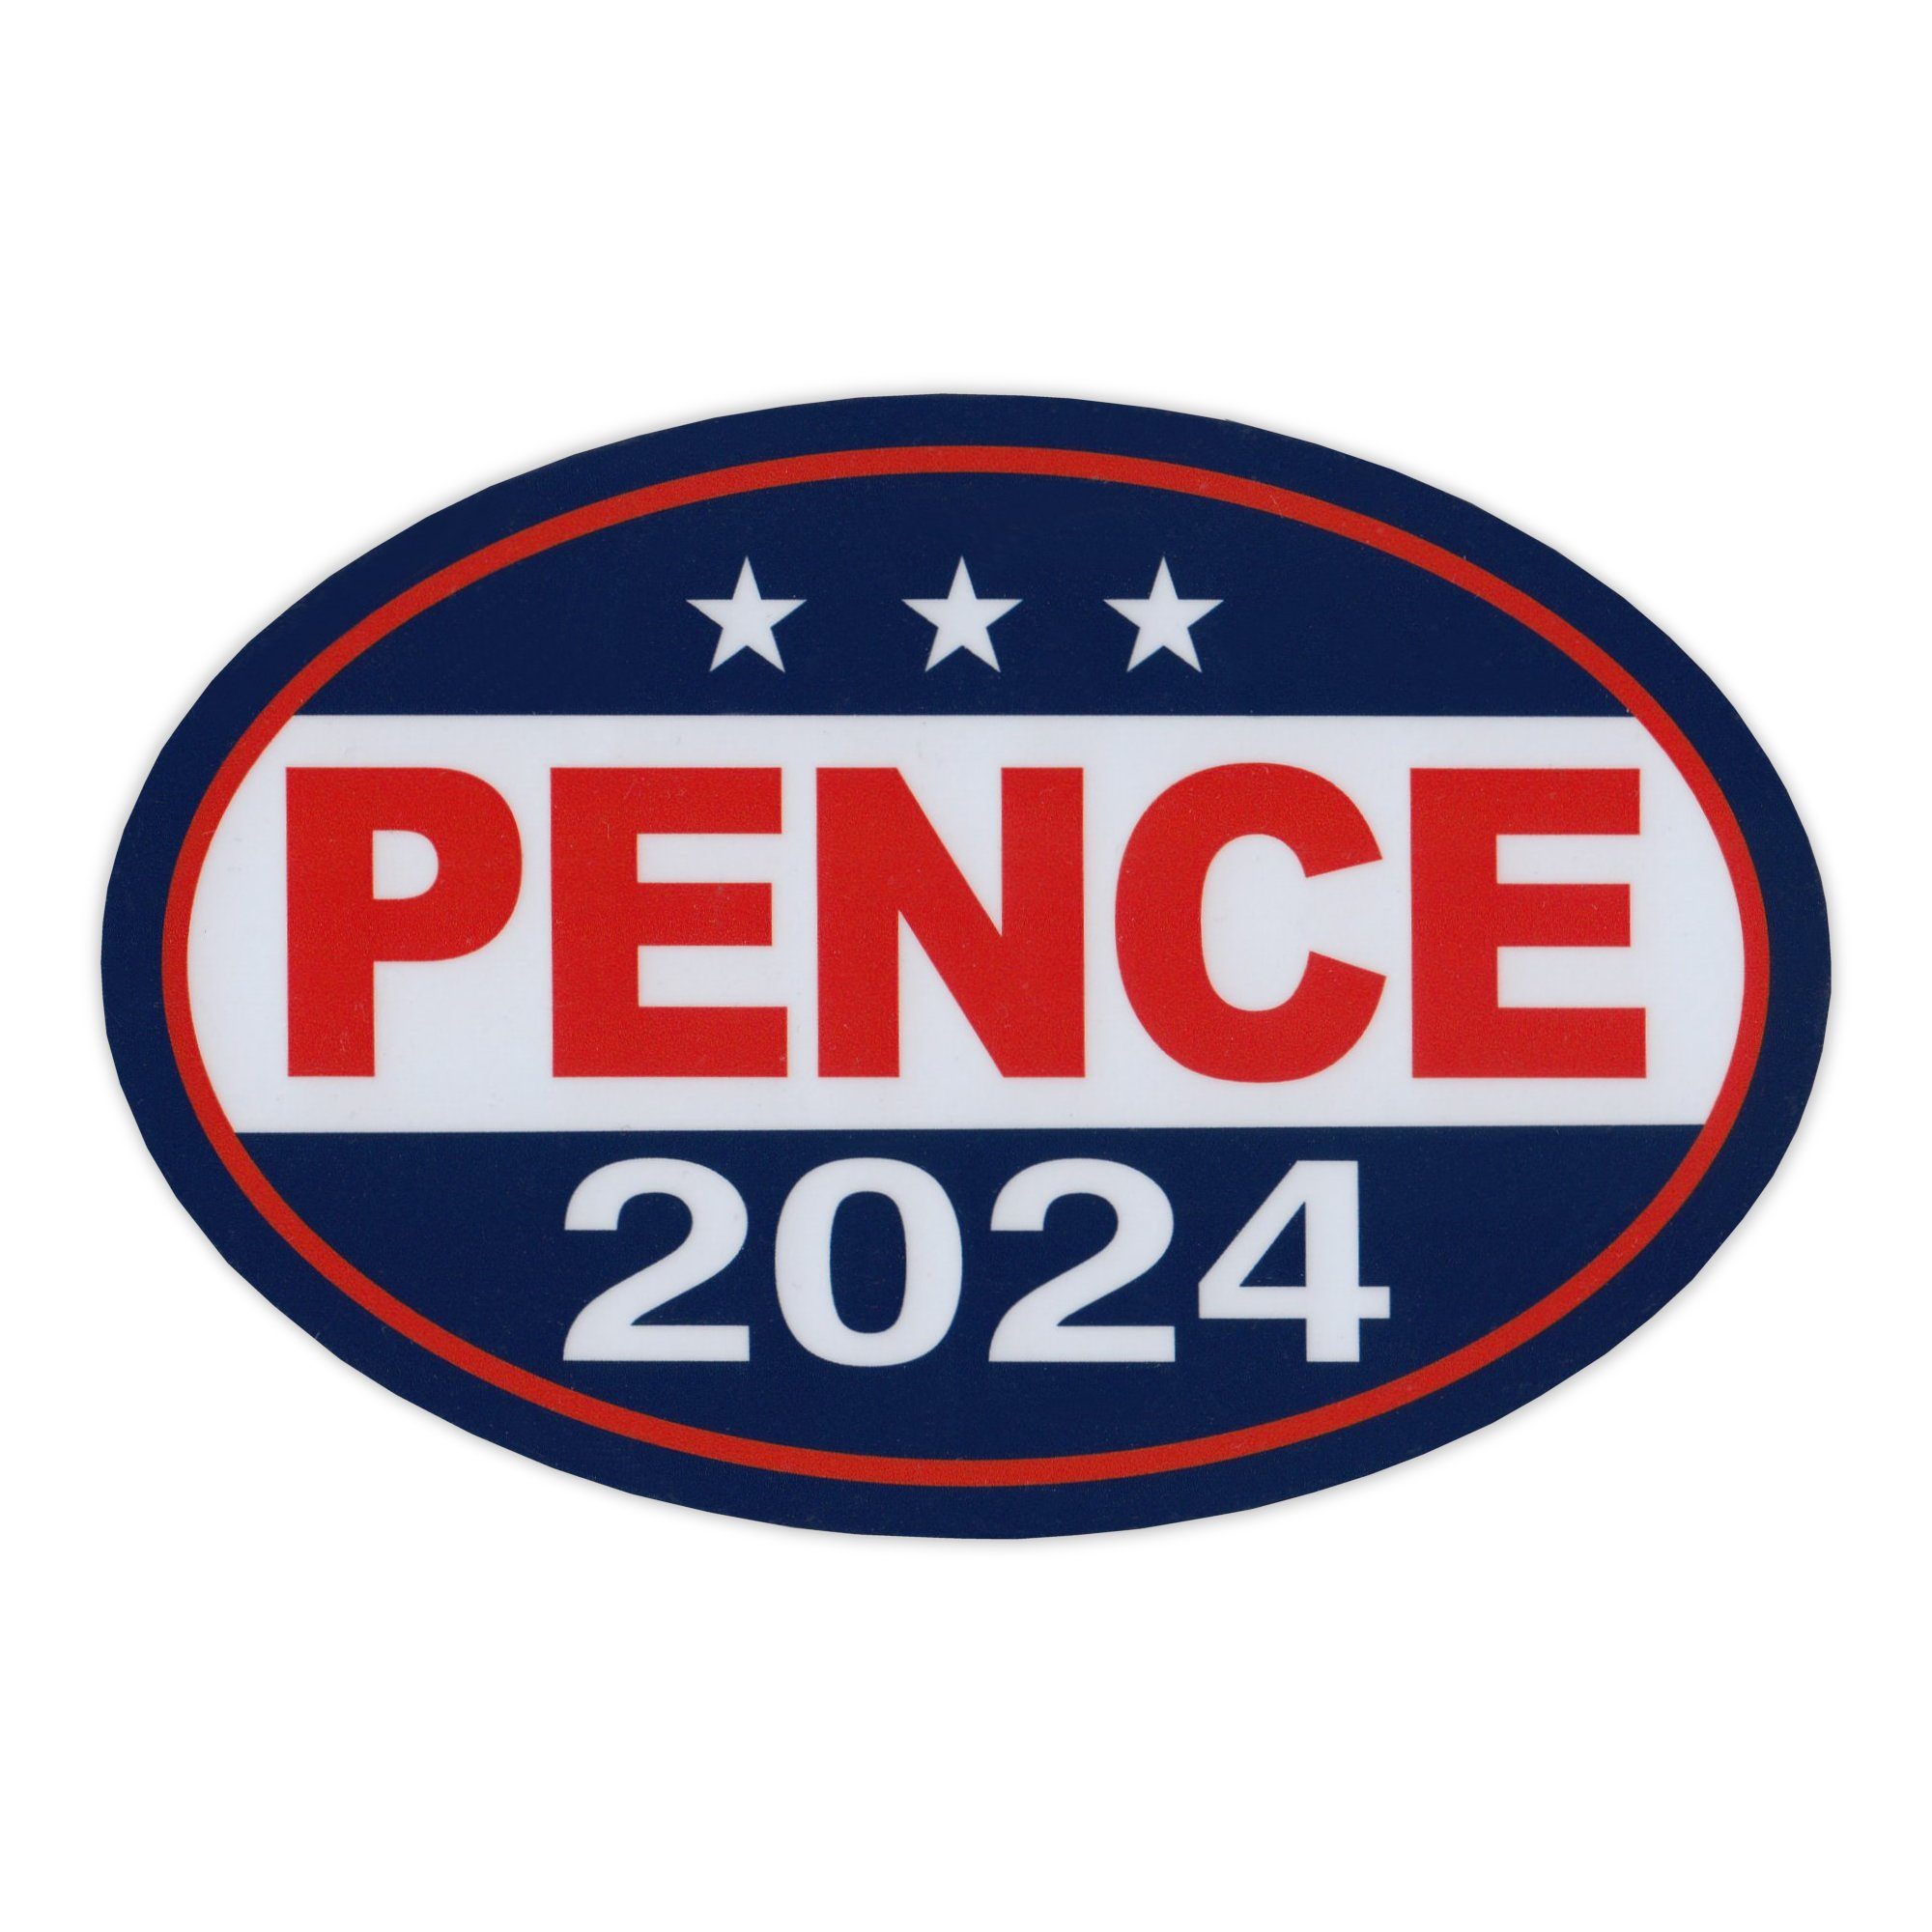 Mike Pence 2024 Oval Magnet